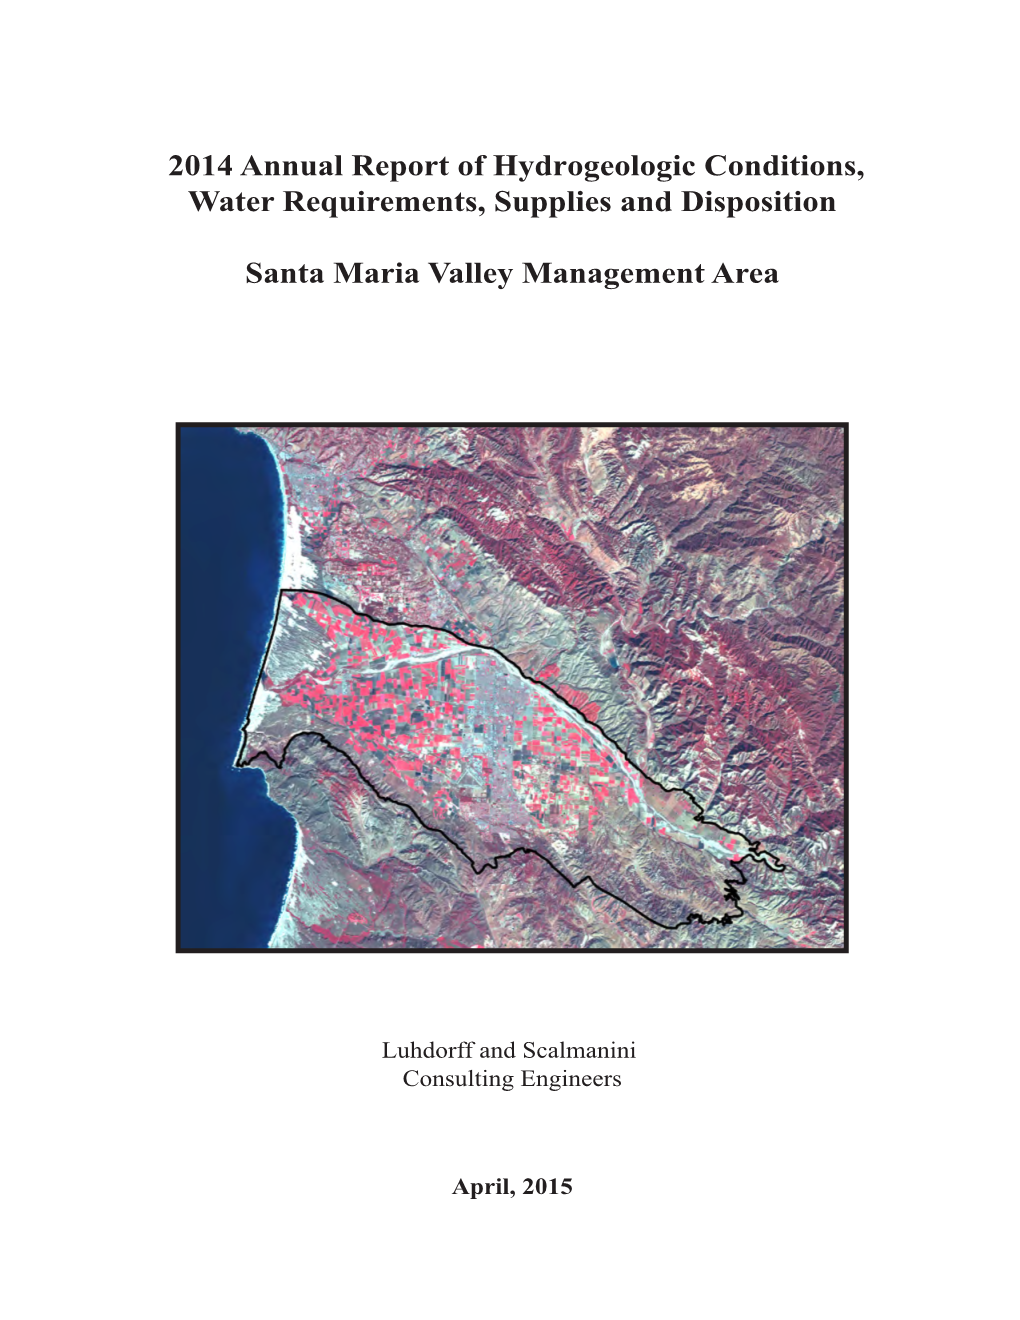 2014 Annual Report of Hydrogeologic Conditions, Water Requirements, Supplies and Disposition